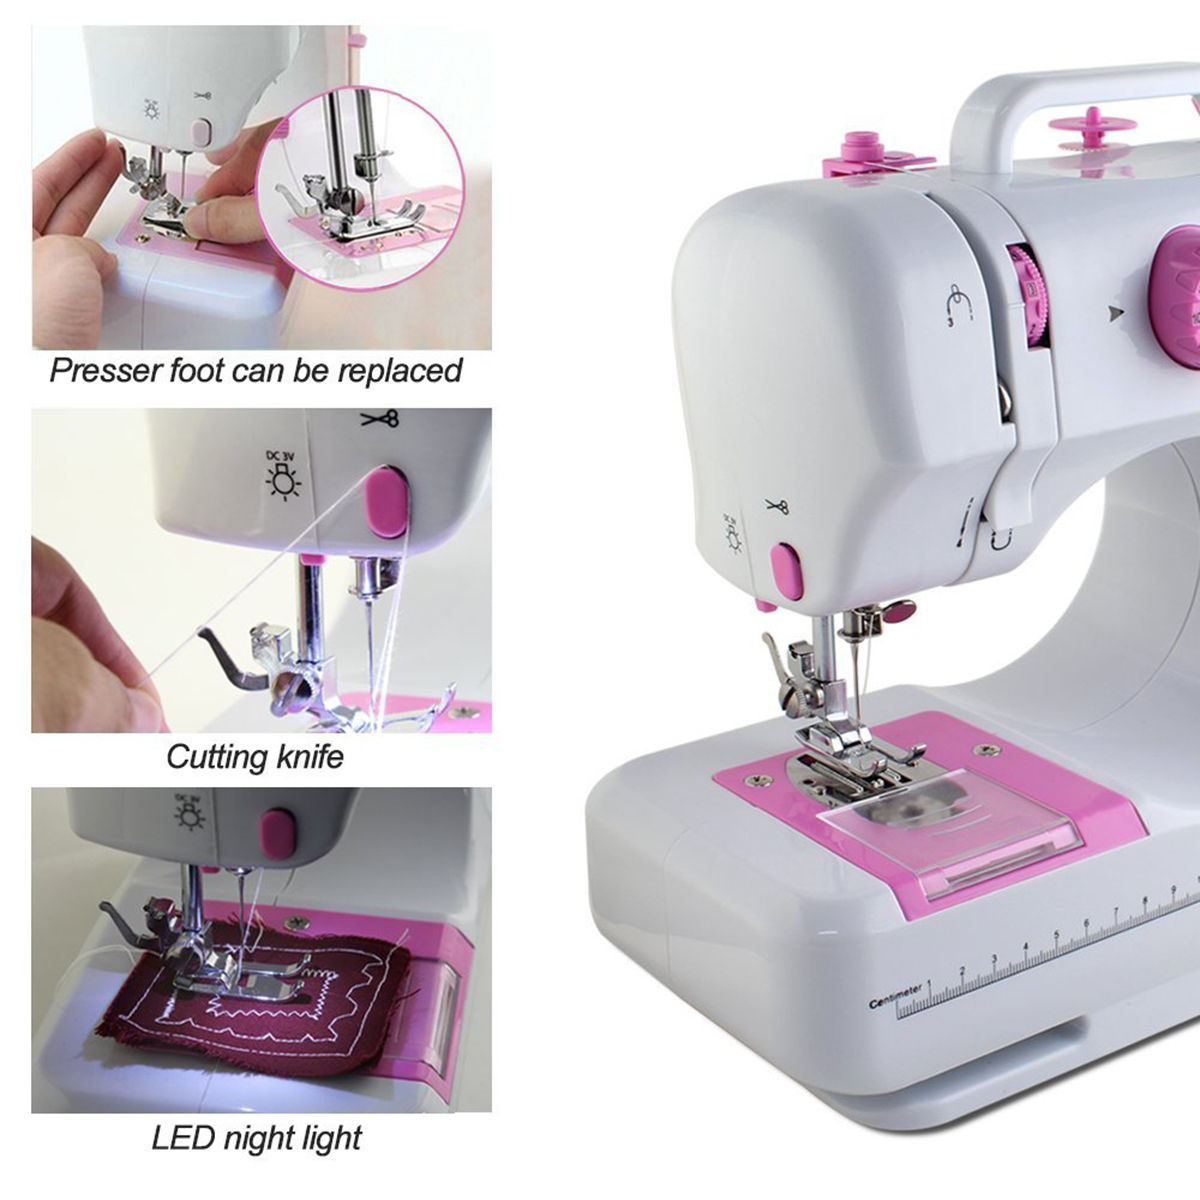 Costway Sewing Machine Free-Arm Crafting Mending Machine with 12 Built-In Stitched White - image 5 of 10